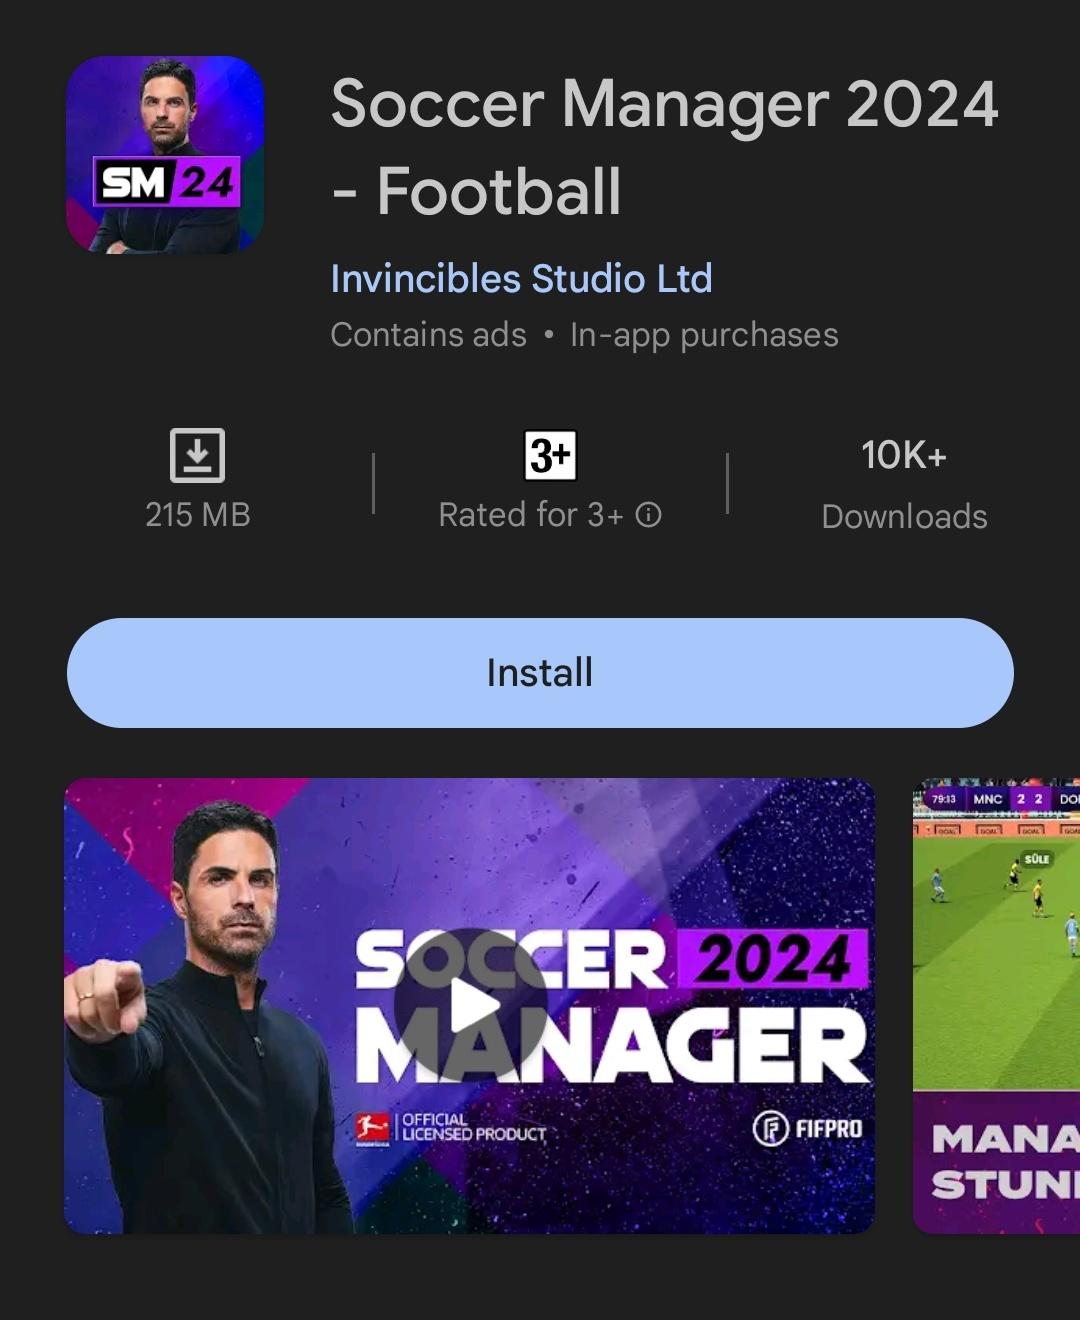 Soccer Manager 2024 Out Now!